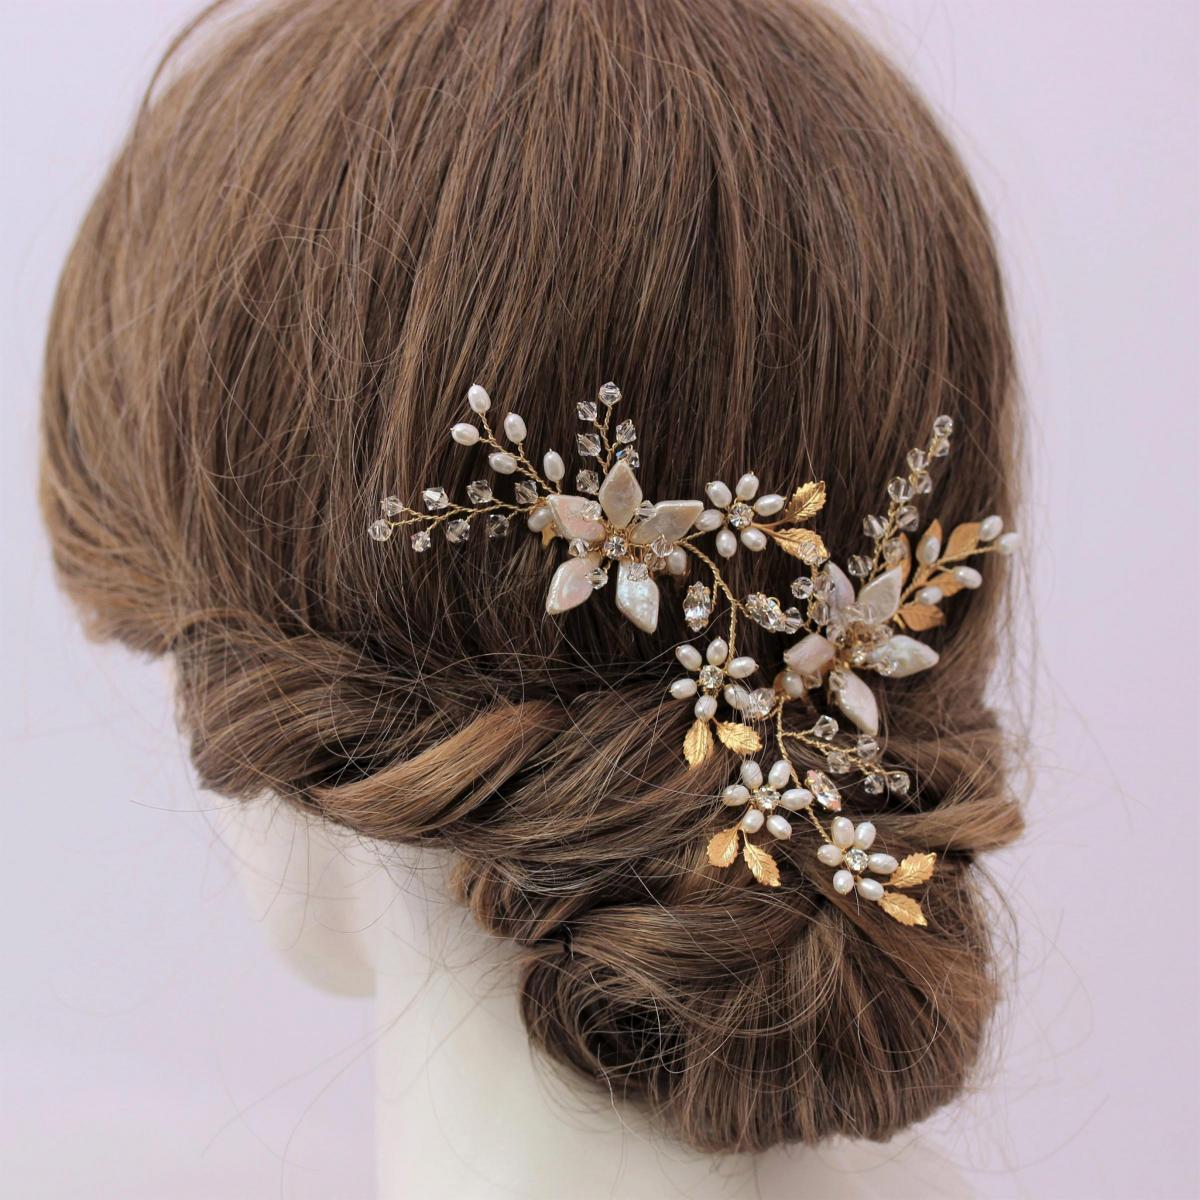 highlight the bridal up-do with these delicate hair combs